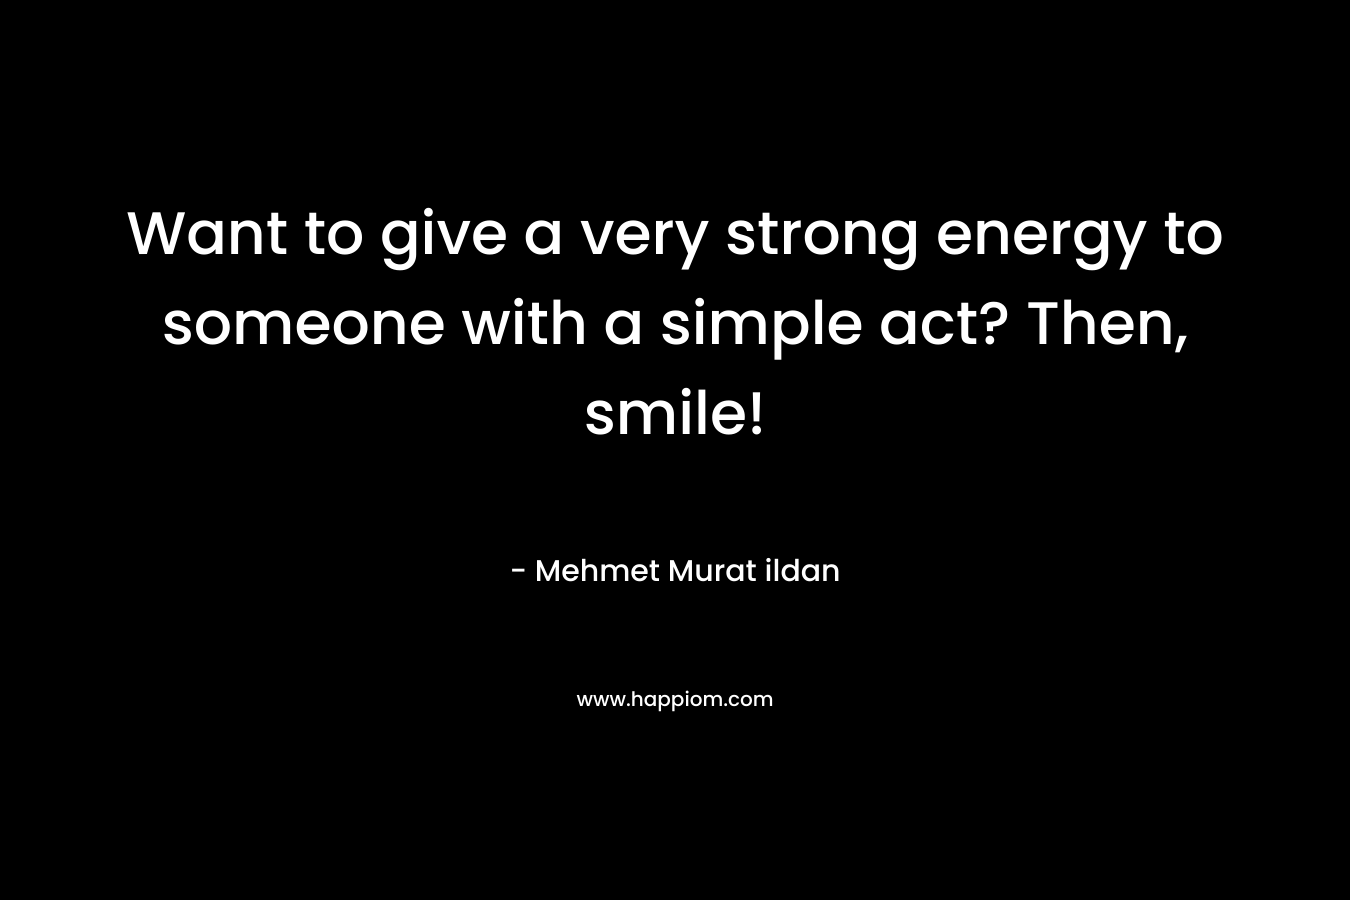 Want to give a very strong energy to someone with a simple act? Then, smile!